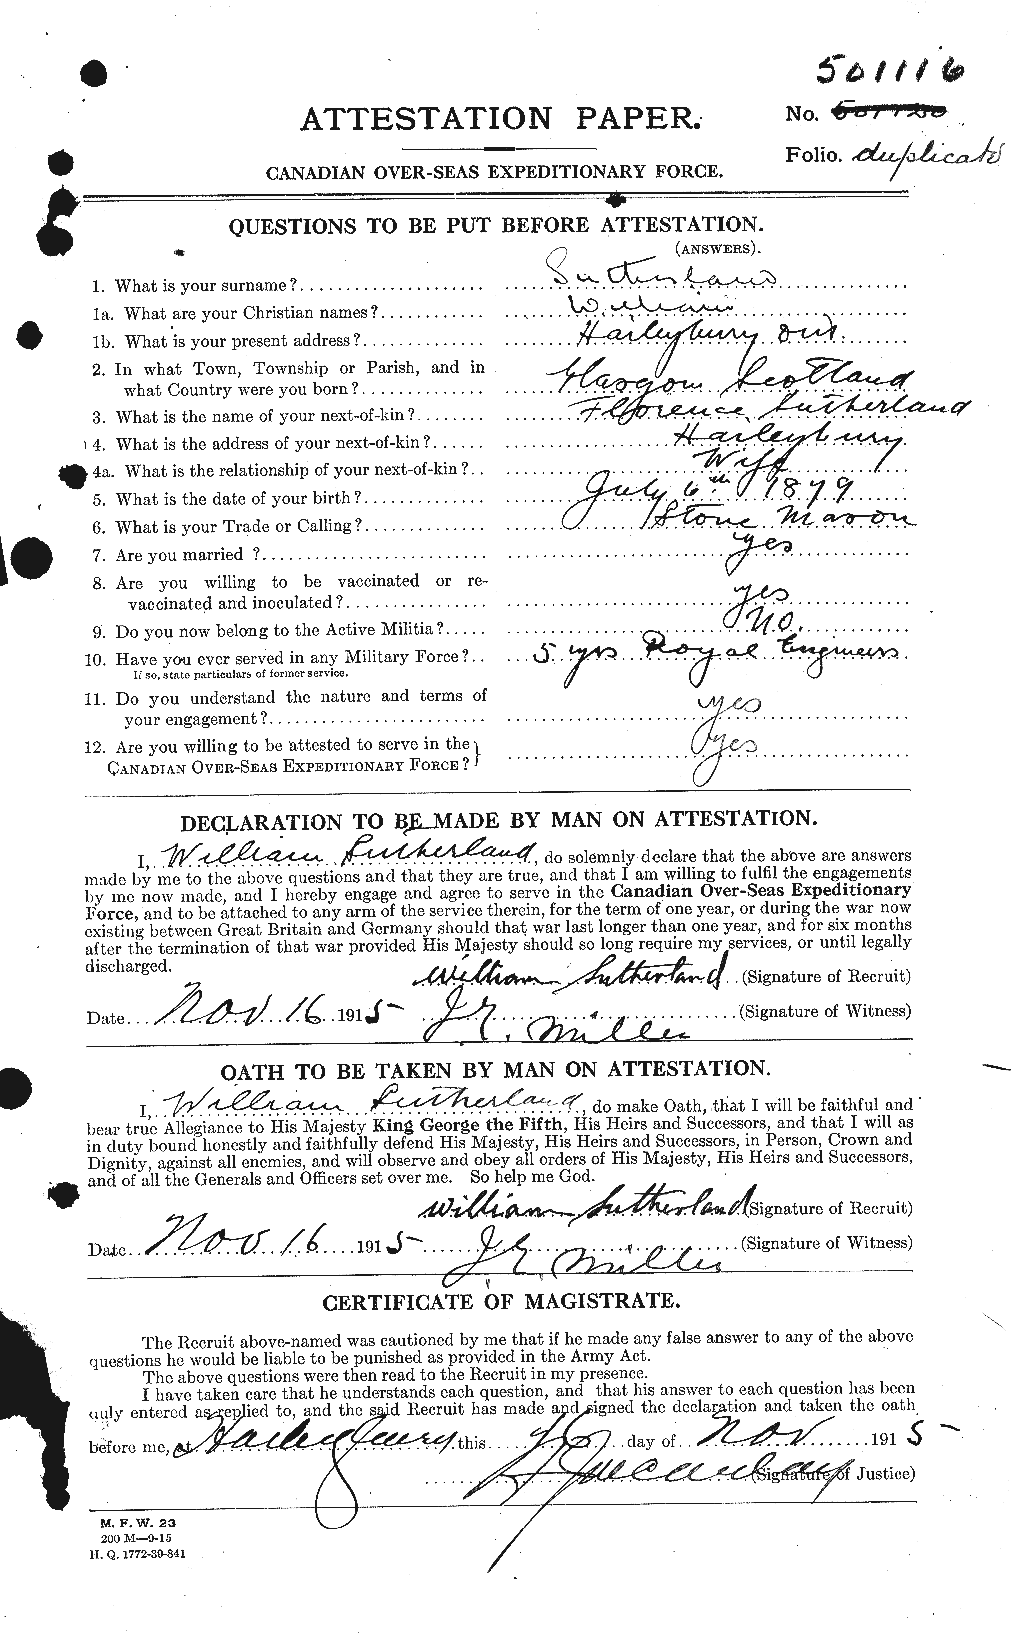 Personnel Records of the First World War - CEF 126455a